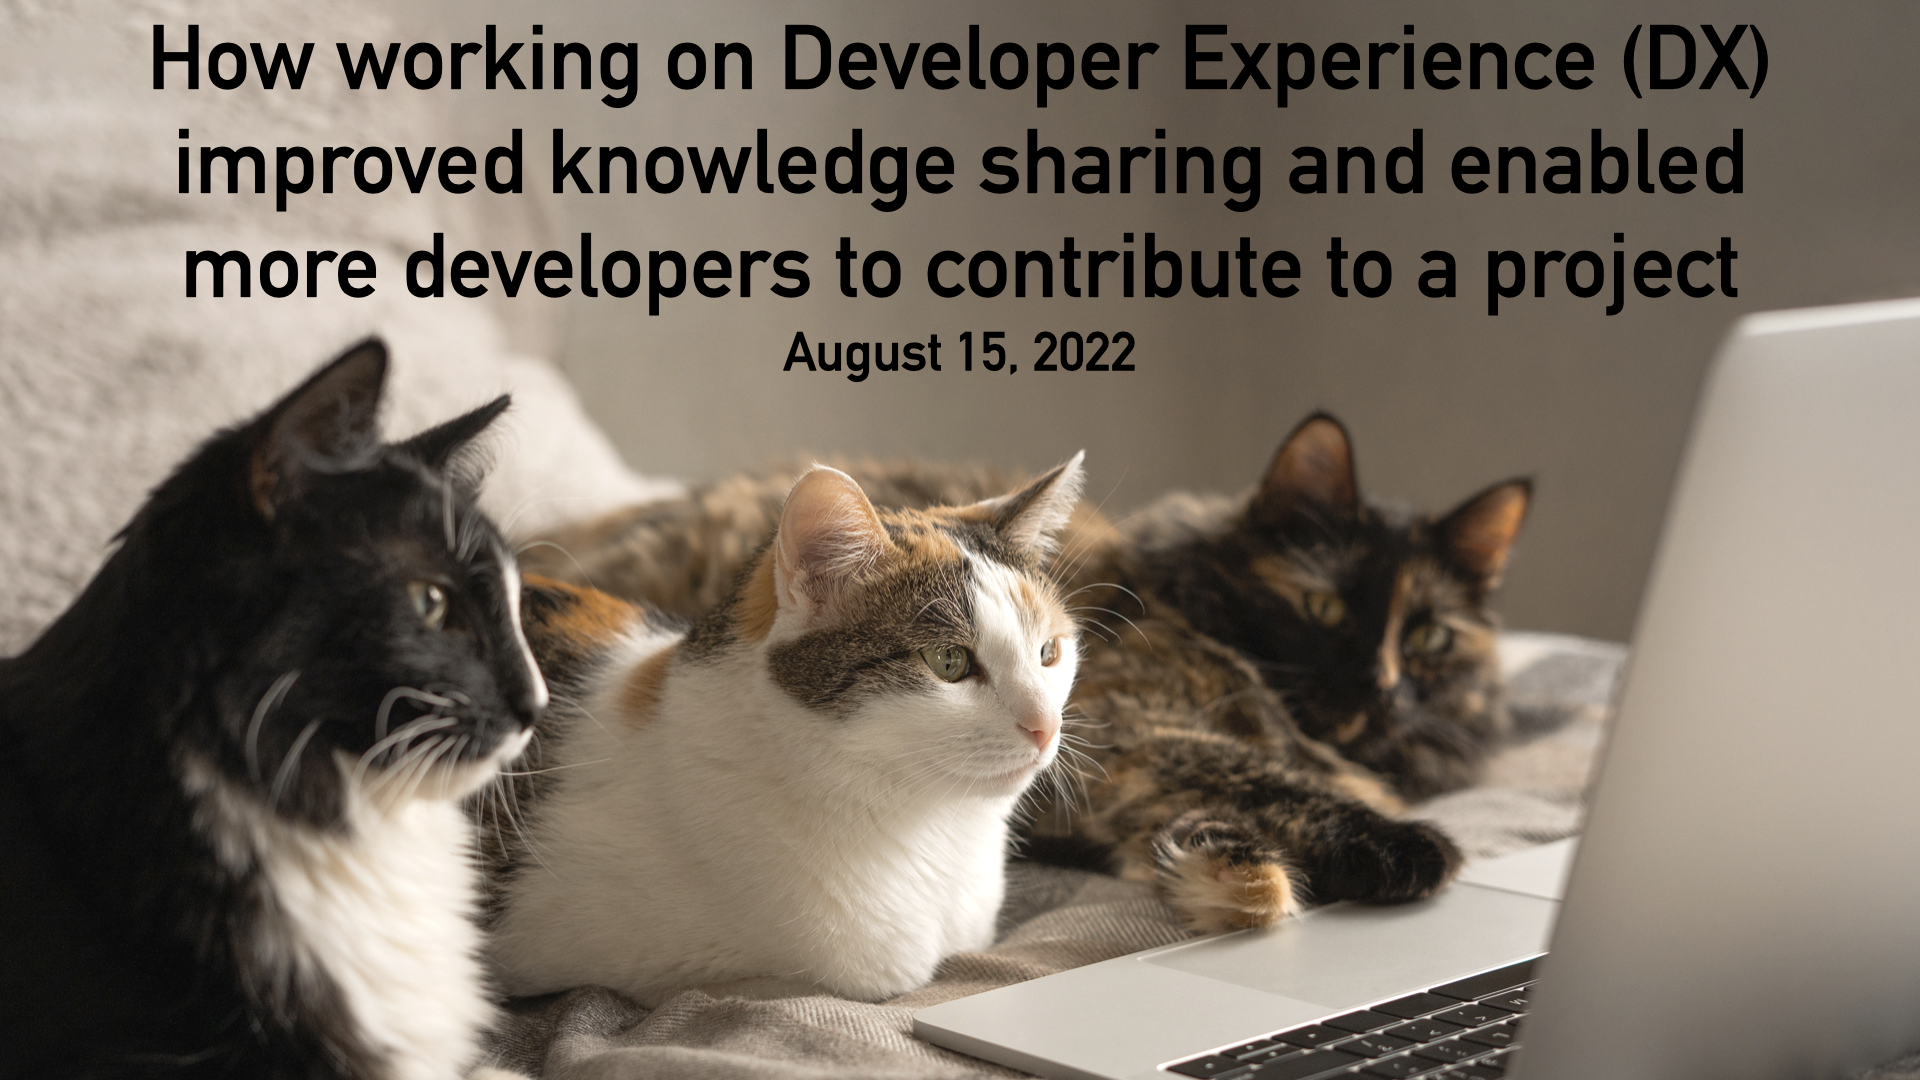 Three cats laying on a bed staring at an open laptop under the title, "How working on Developer Experience (DX) improved knowledge sharing and enabled more developers to contribute to a project"